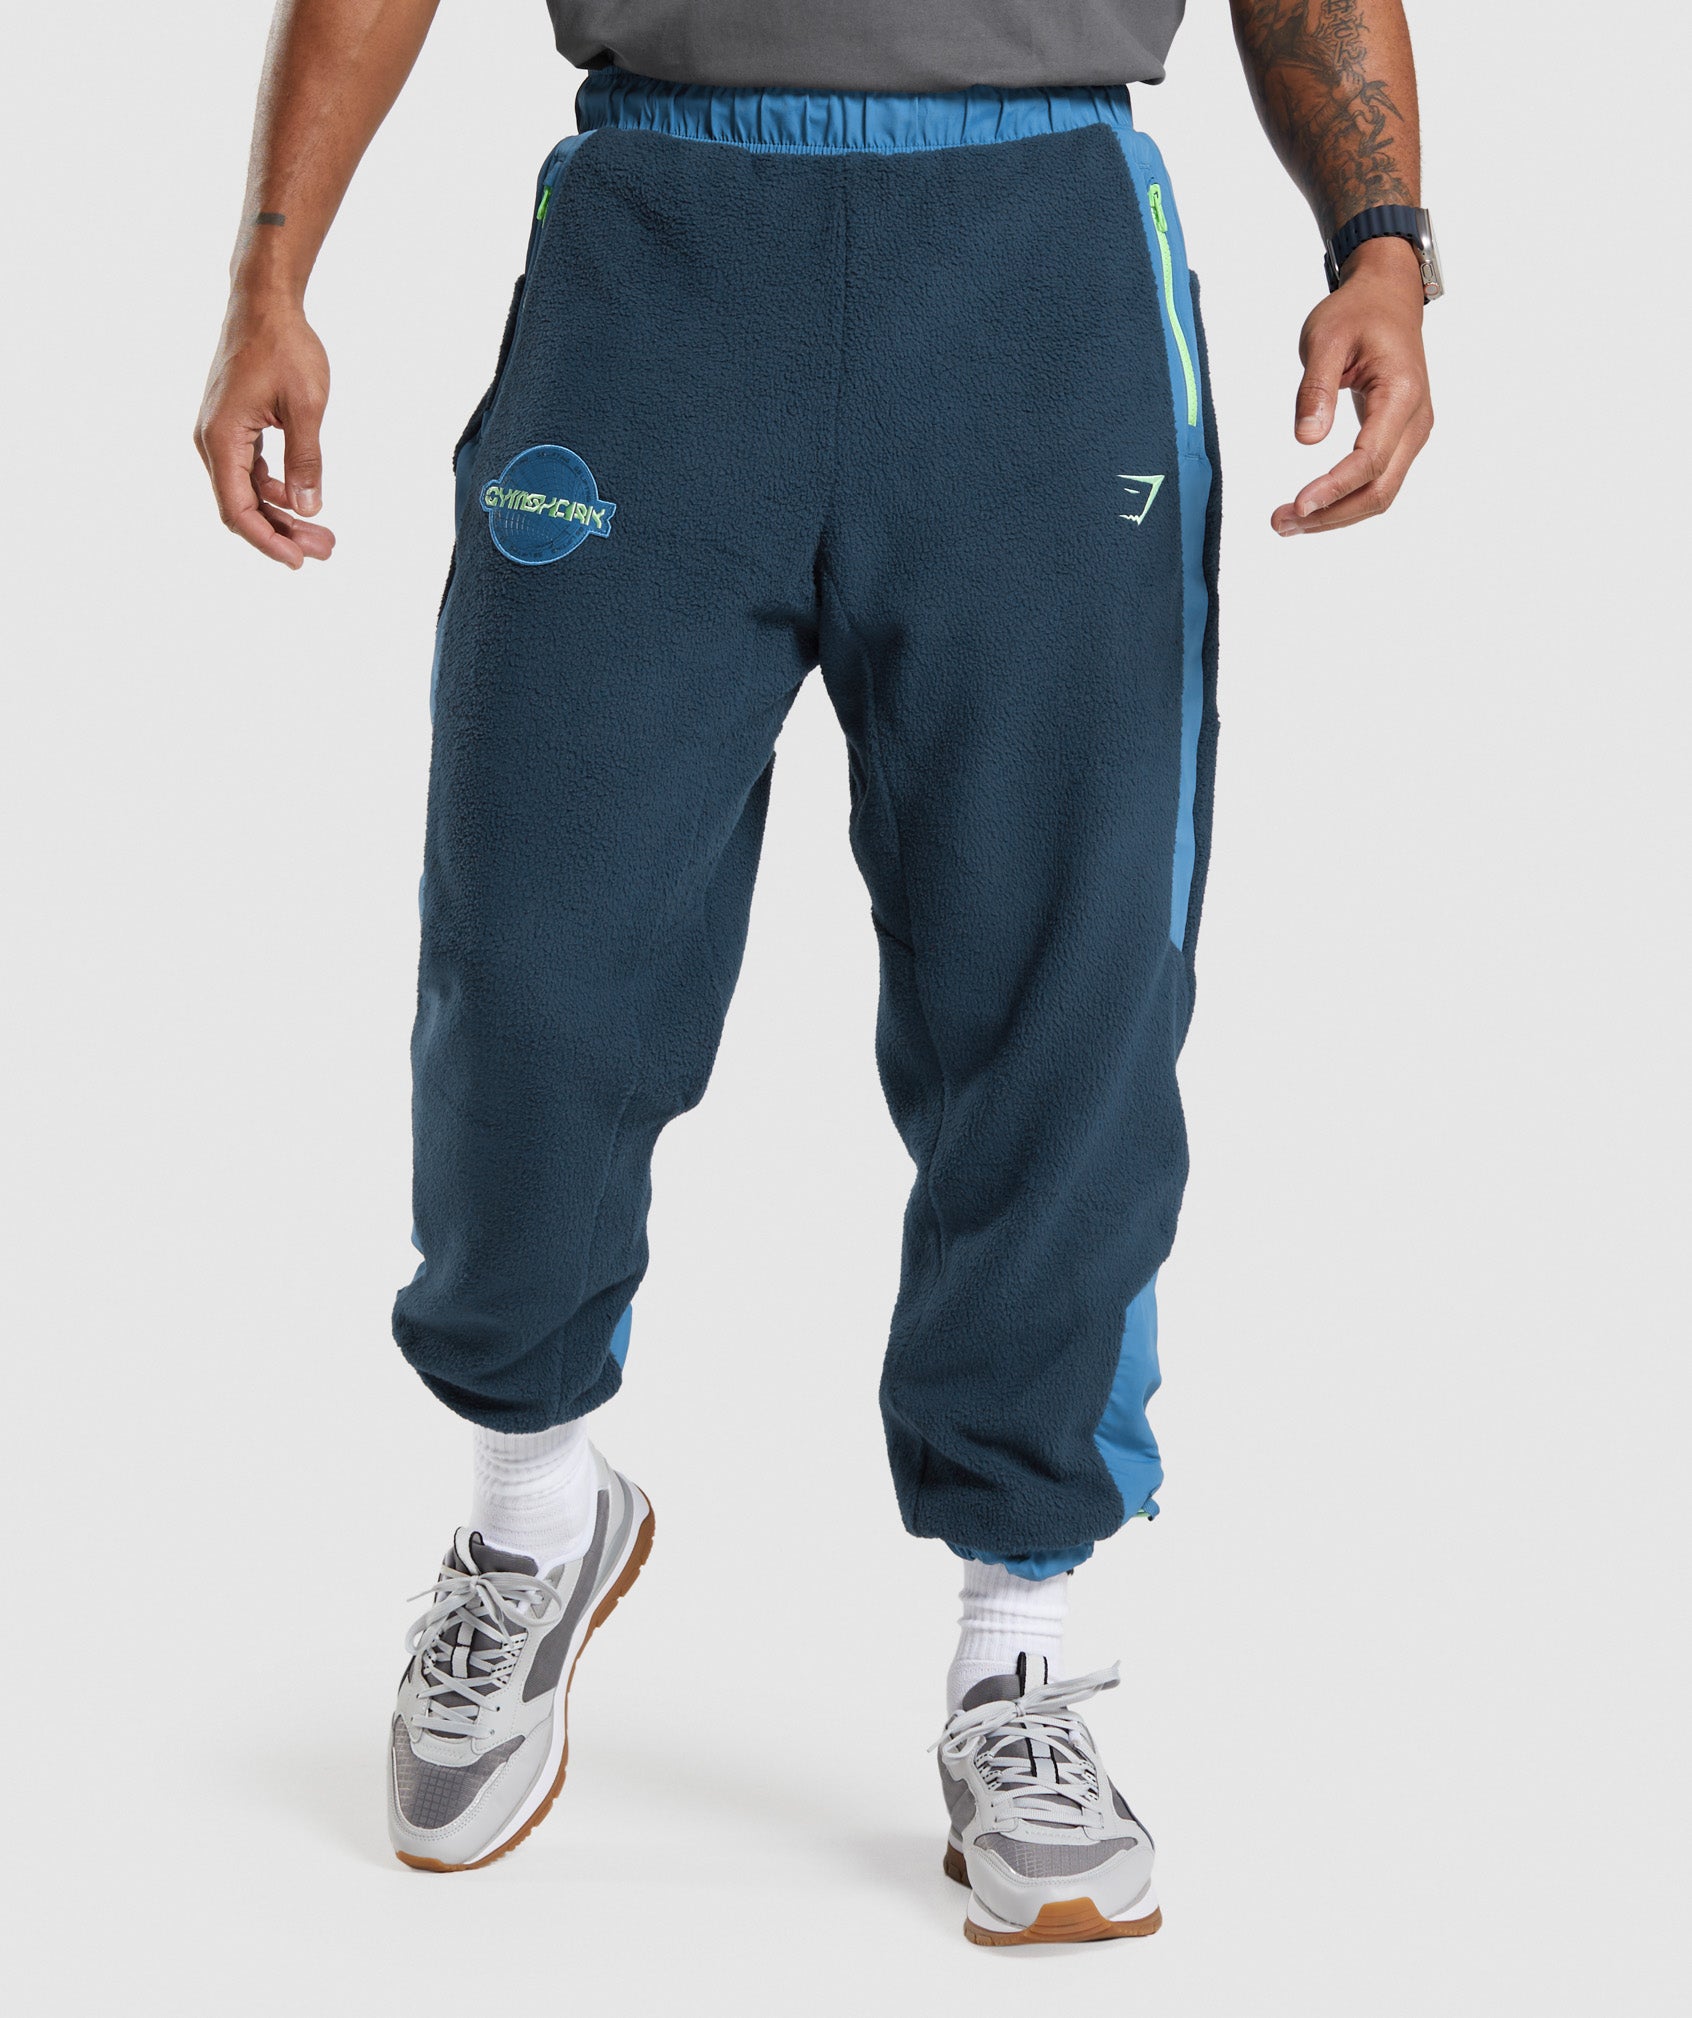 Vibes Joggers in Navy/Lakeside Blue